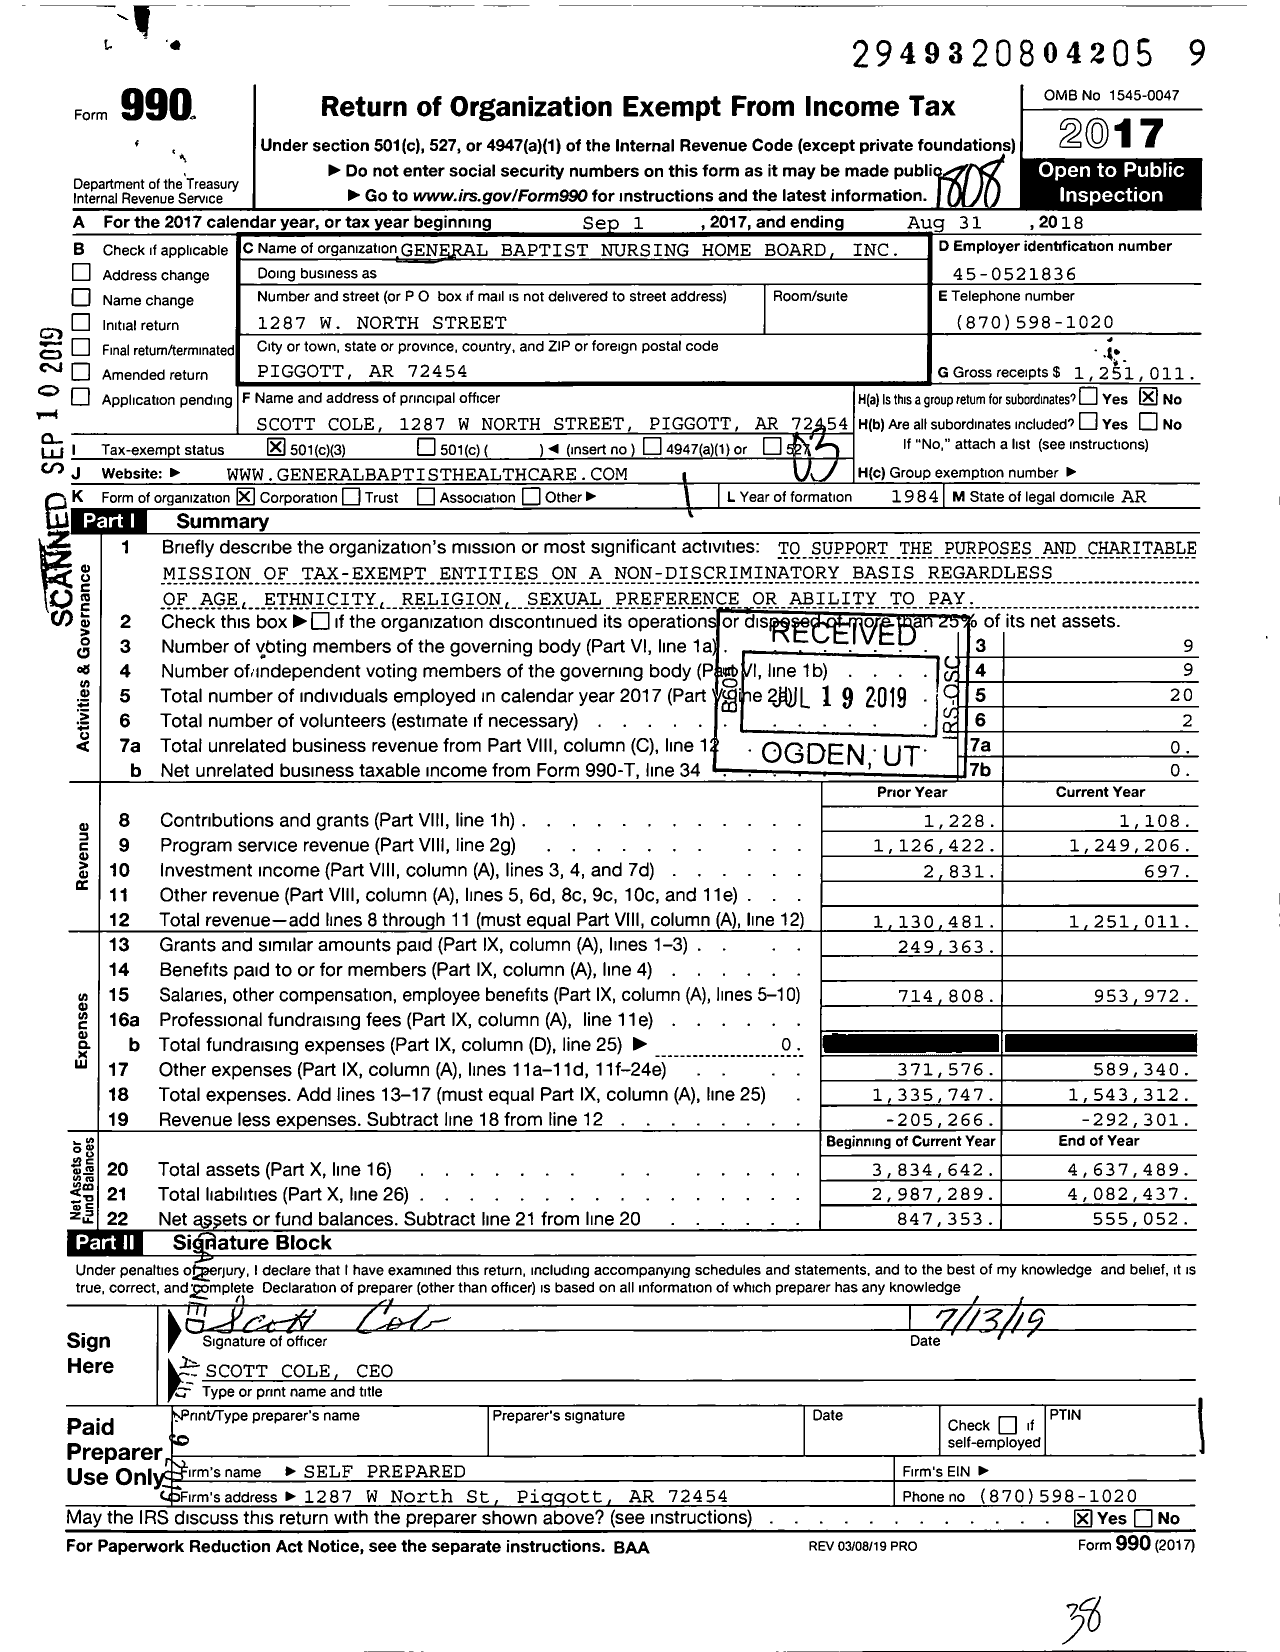 Image of first page of 2017 Form 990 for General Baptist Nursing Home Board